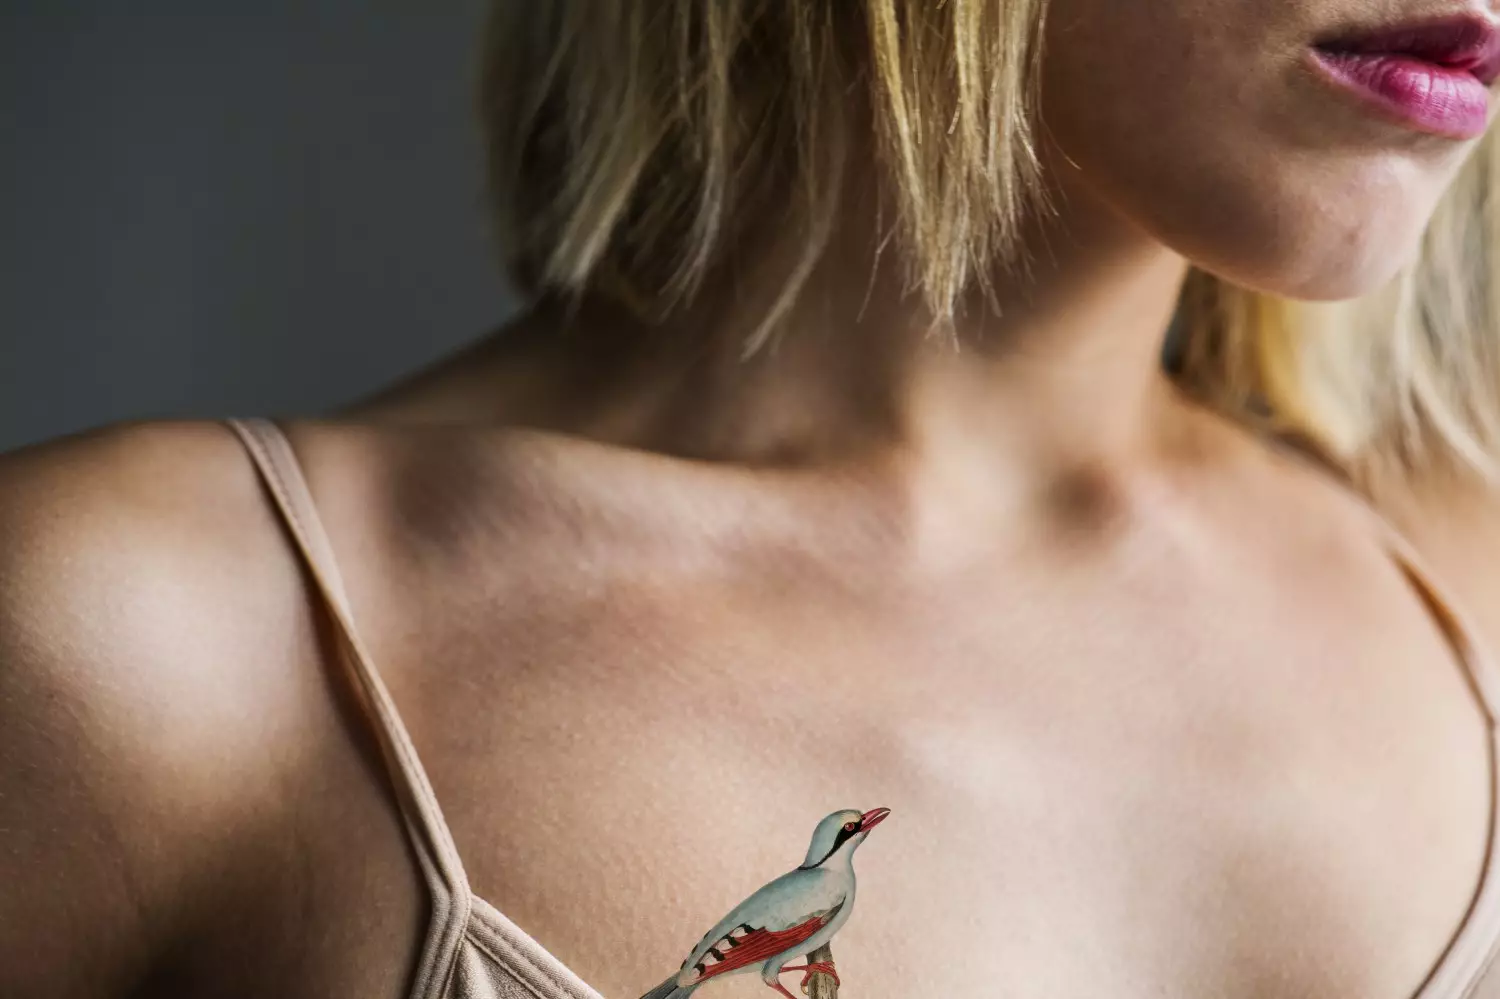 close up of tattoo on the chest of a woman pubdgn compressed